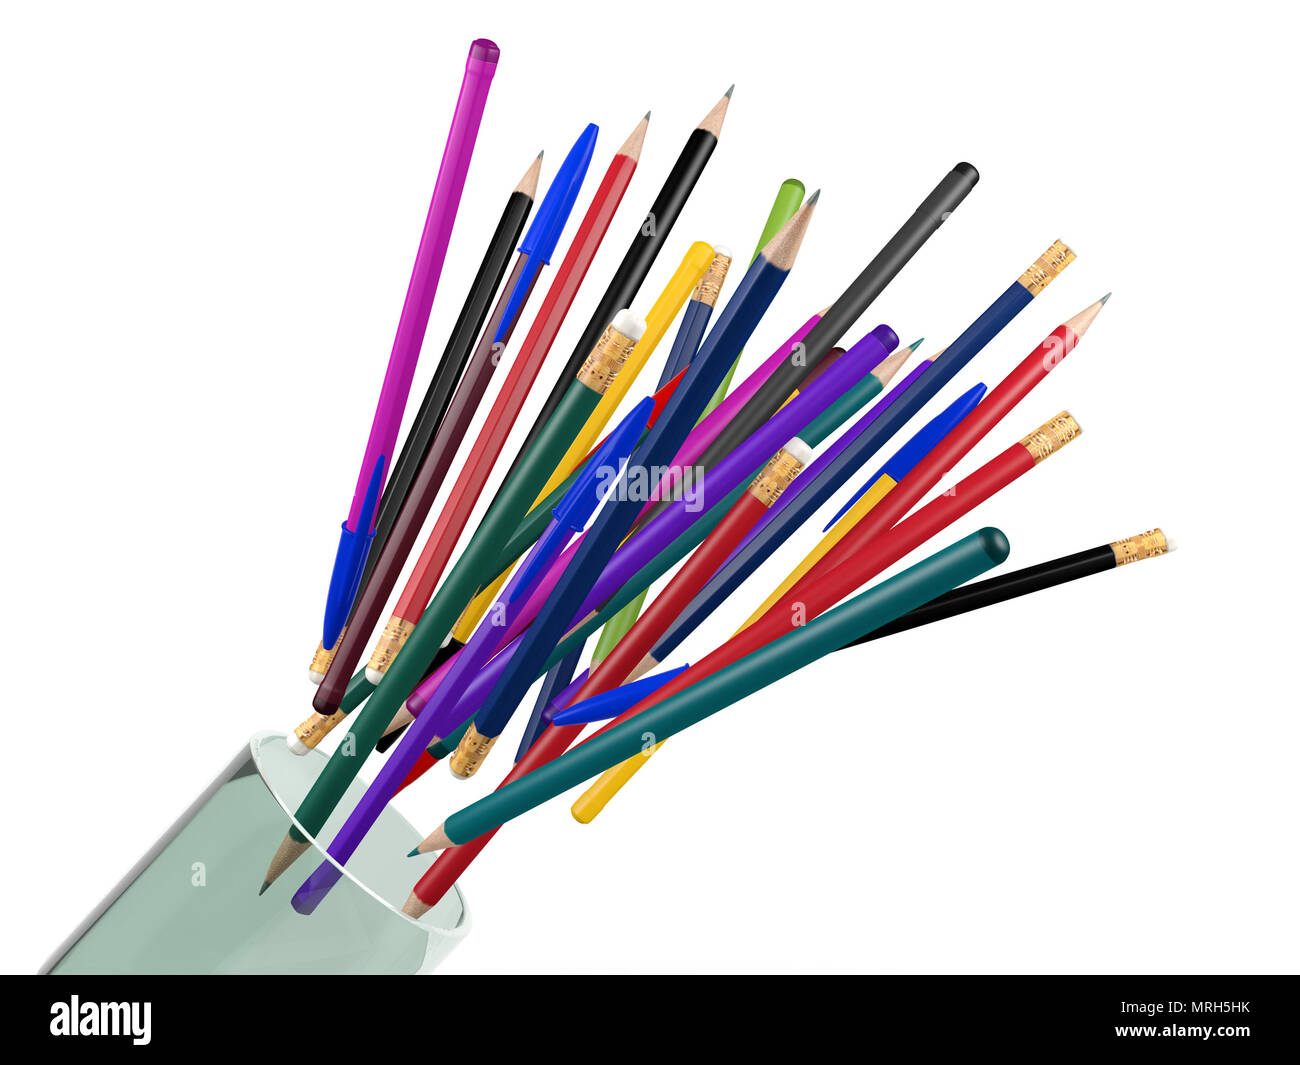 Group of pens, pencils, crayons bouncing from transparent glass, stationery elements Stock Photo